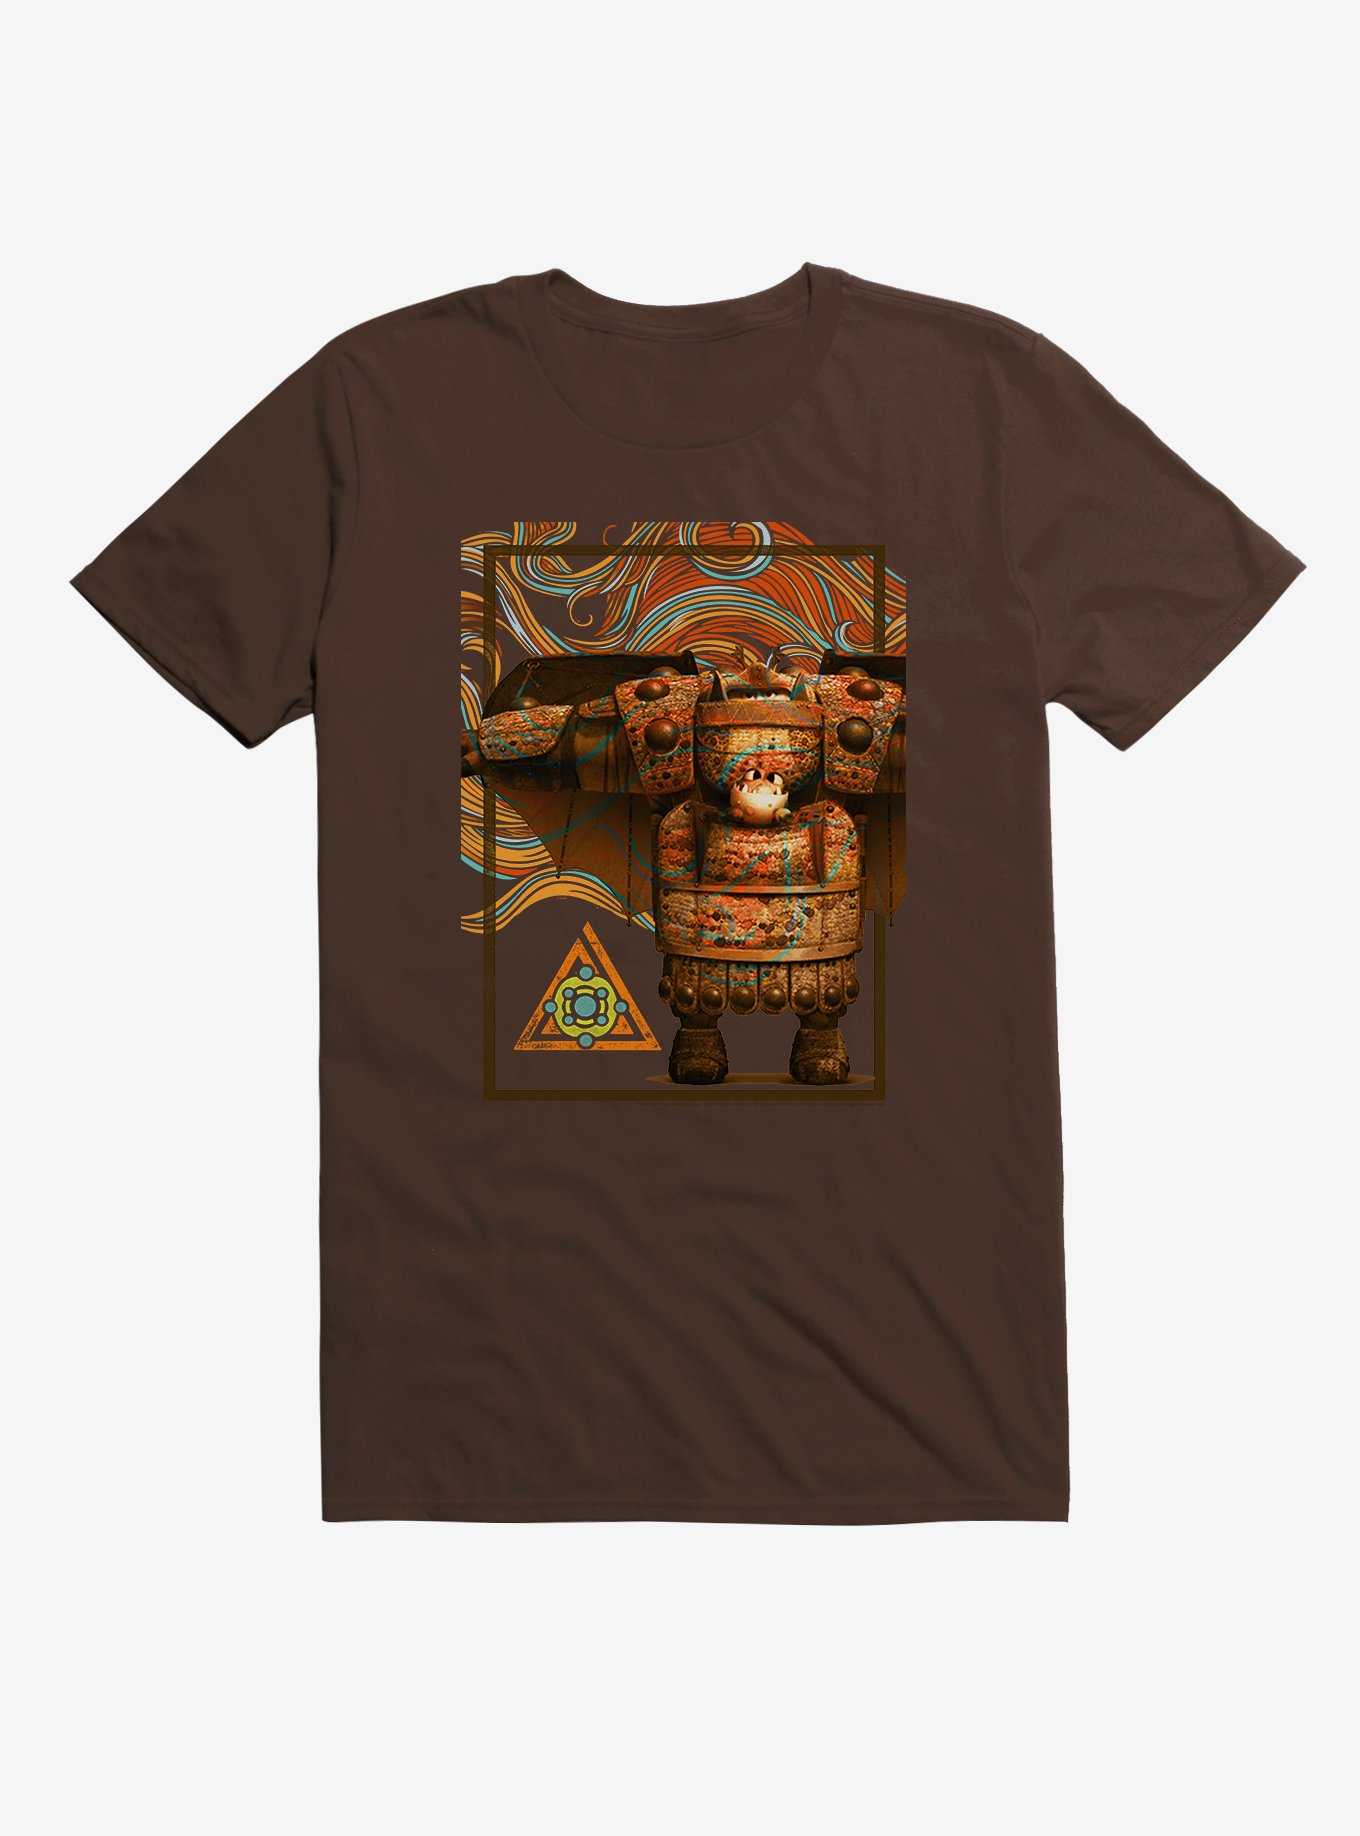 How To Train Your Dragon Fishlegs T-Shirt, , hi-res